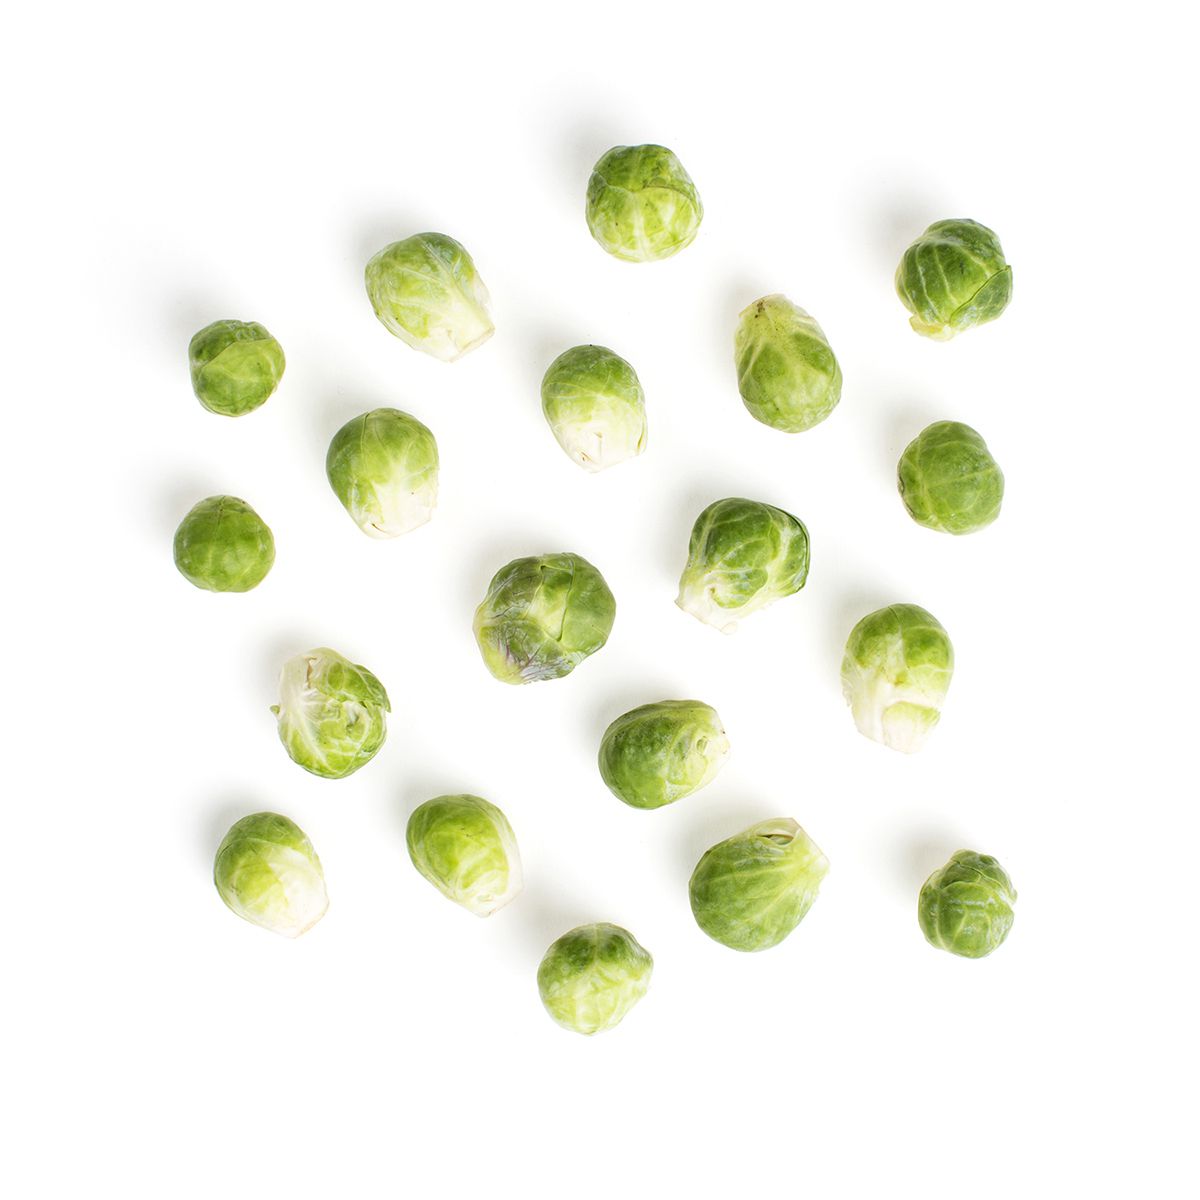 Ocean Mist Farms Cleaned Brussels Sprouts 3 LB